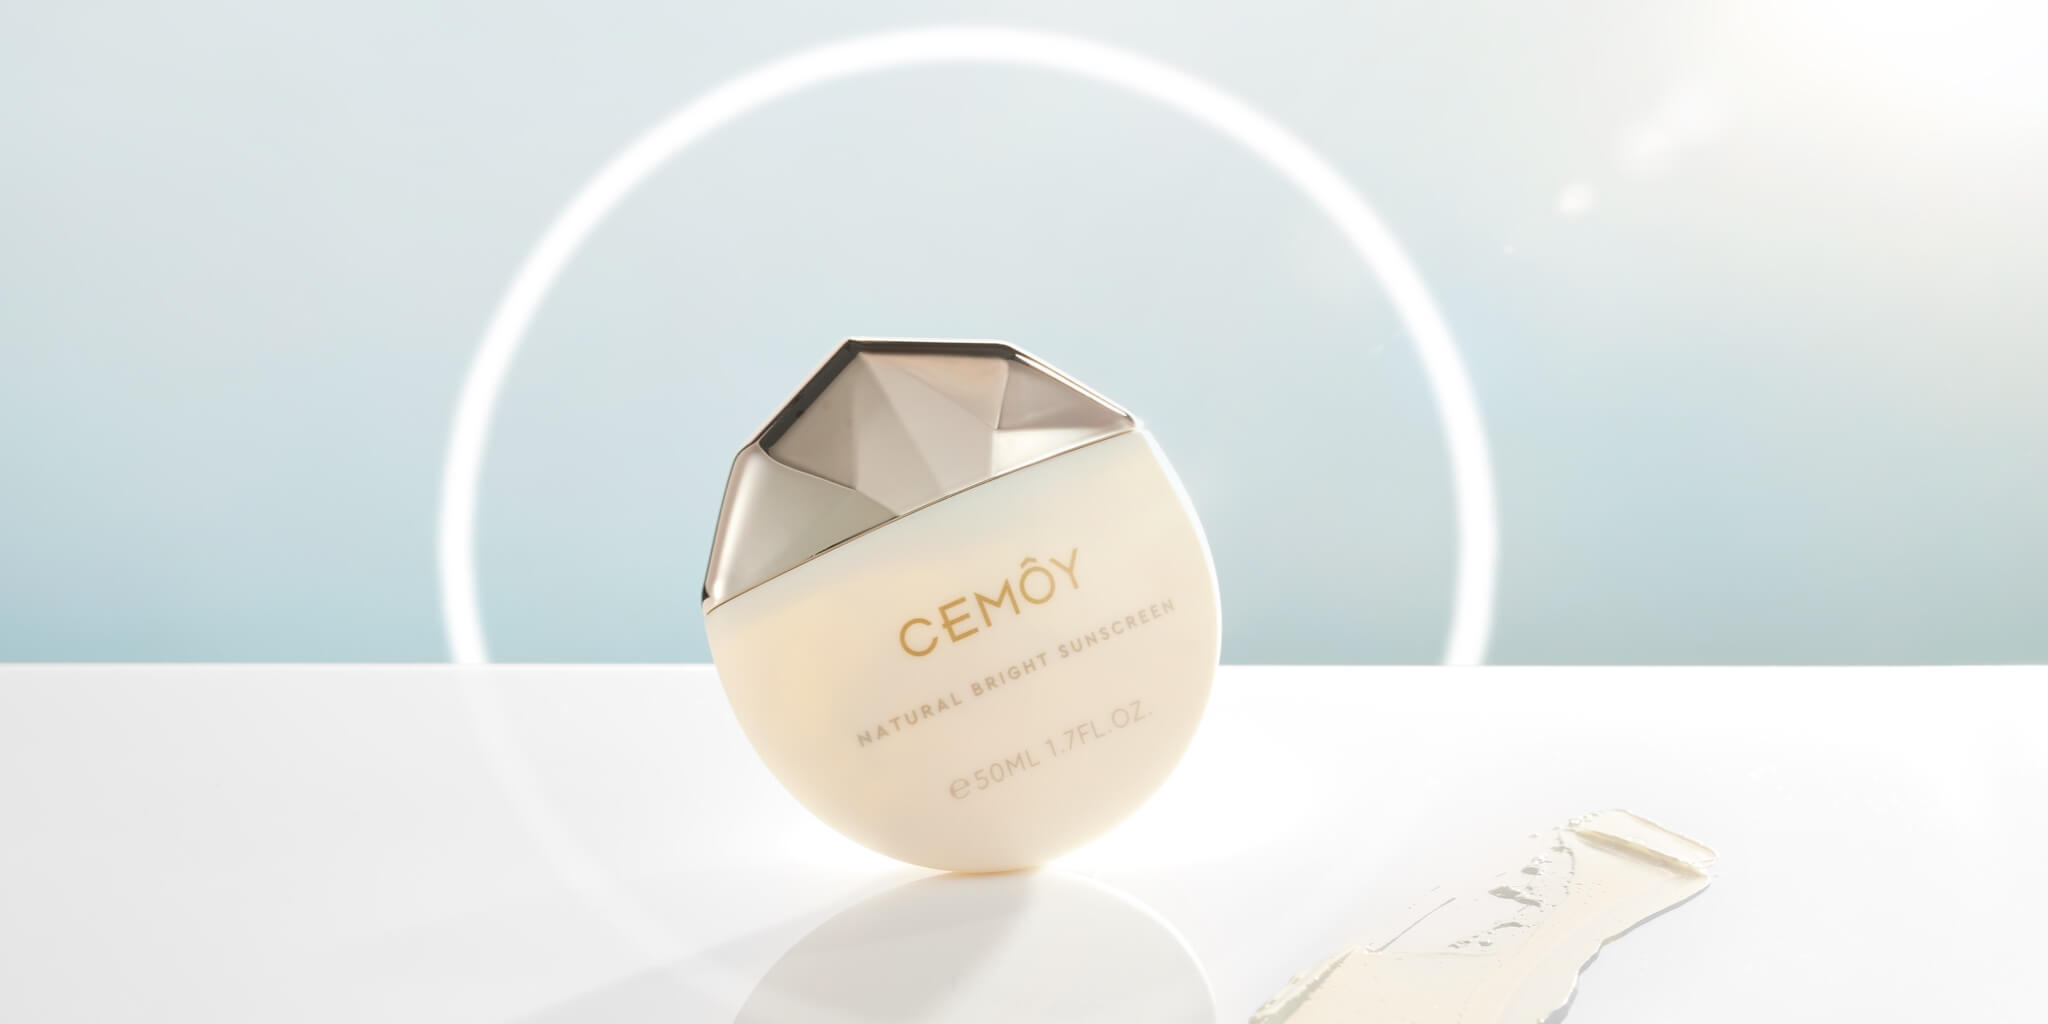 //cemoy.com/uploads/2022/10/CEMOY_PRODUCT_Natural-bright-sunscreen_R1-img.jpg